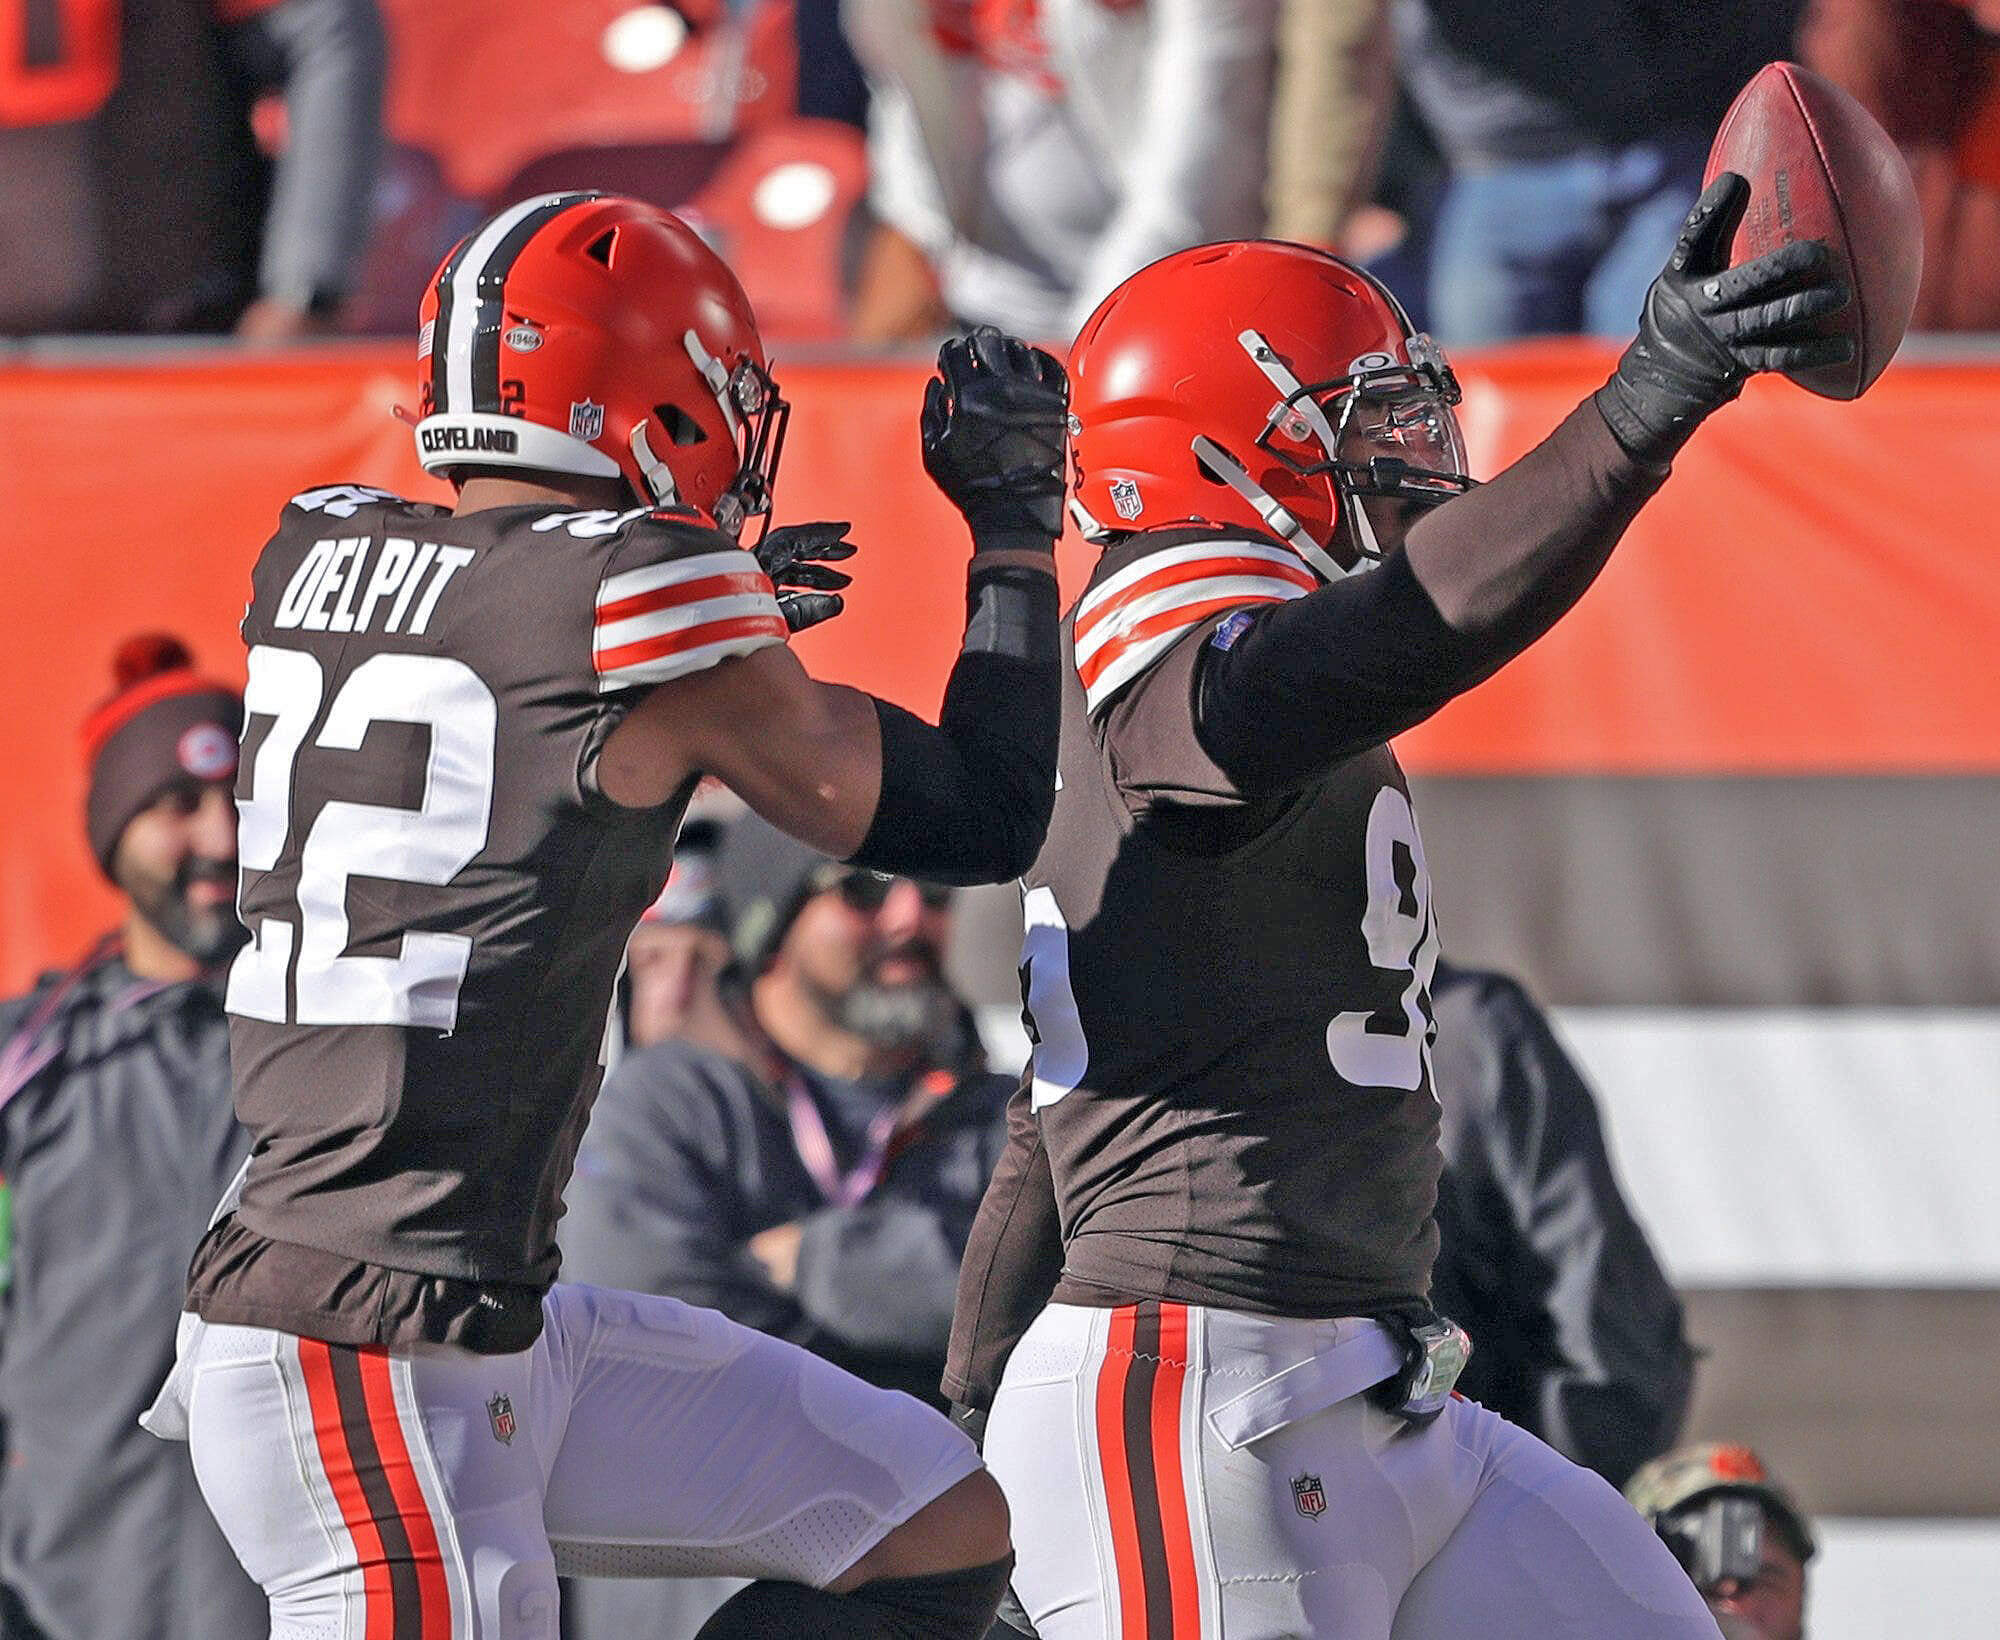 Ohio Sports Betting: Cleveland Browns and Bally’s Announce Partnership Ahead of State Launch